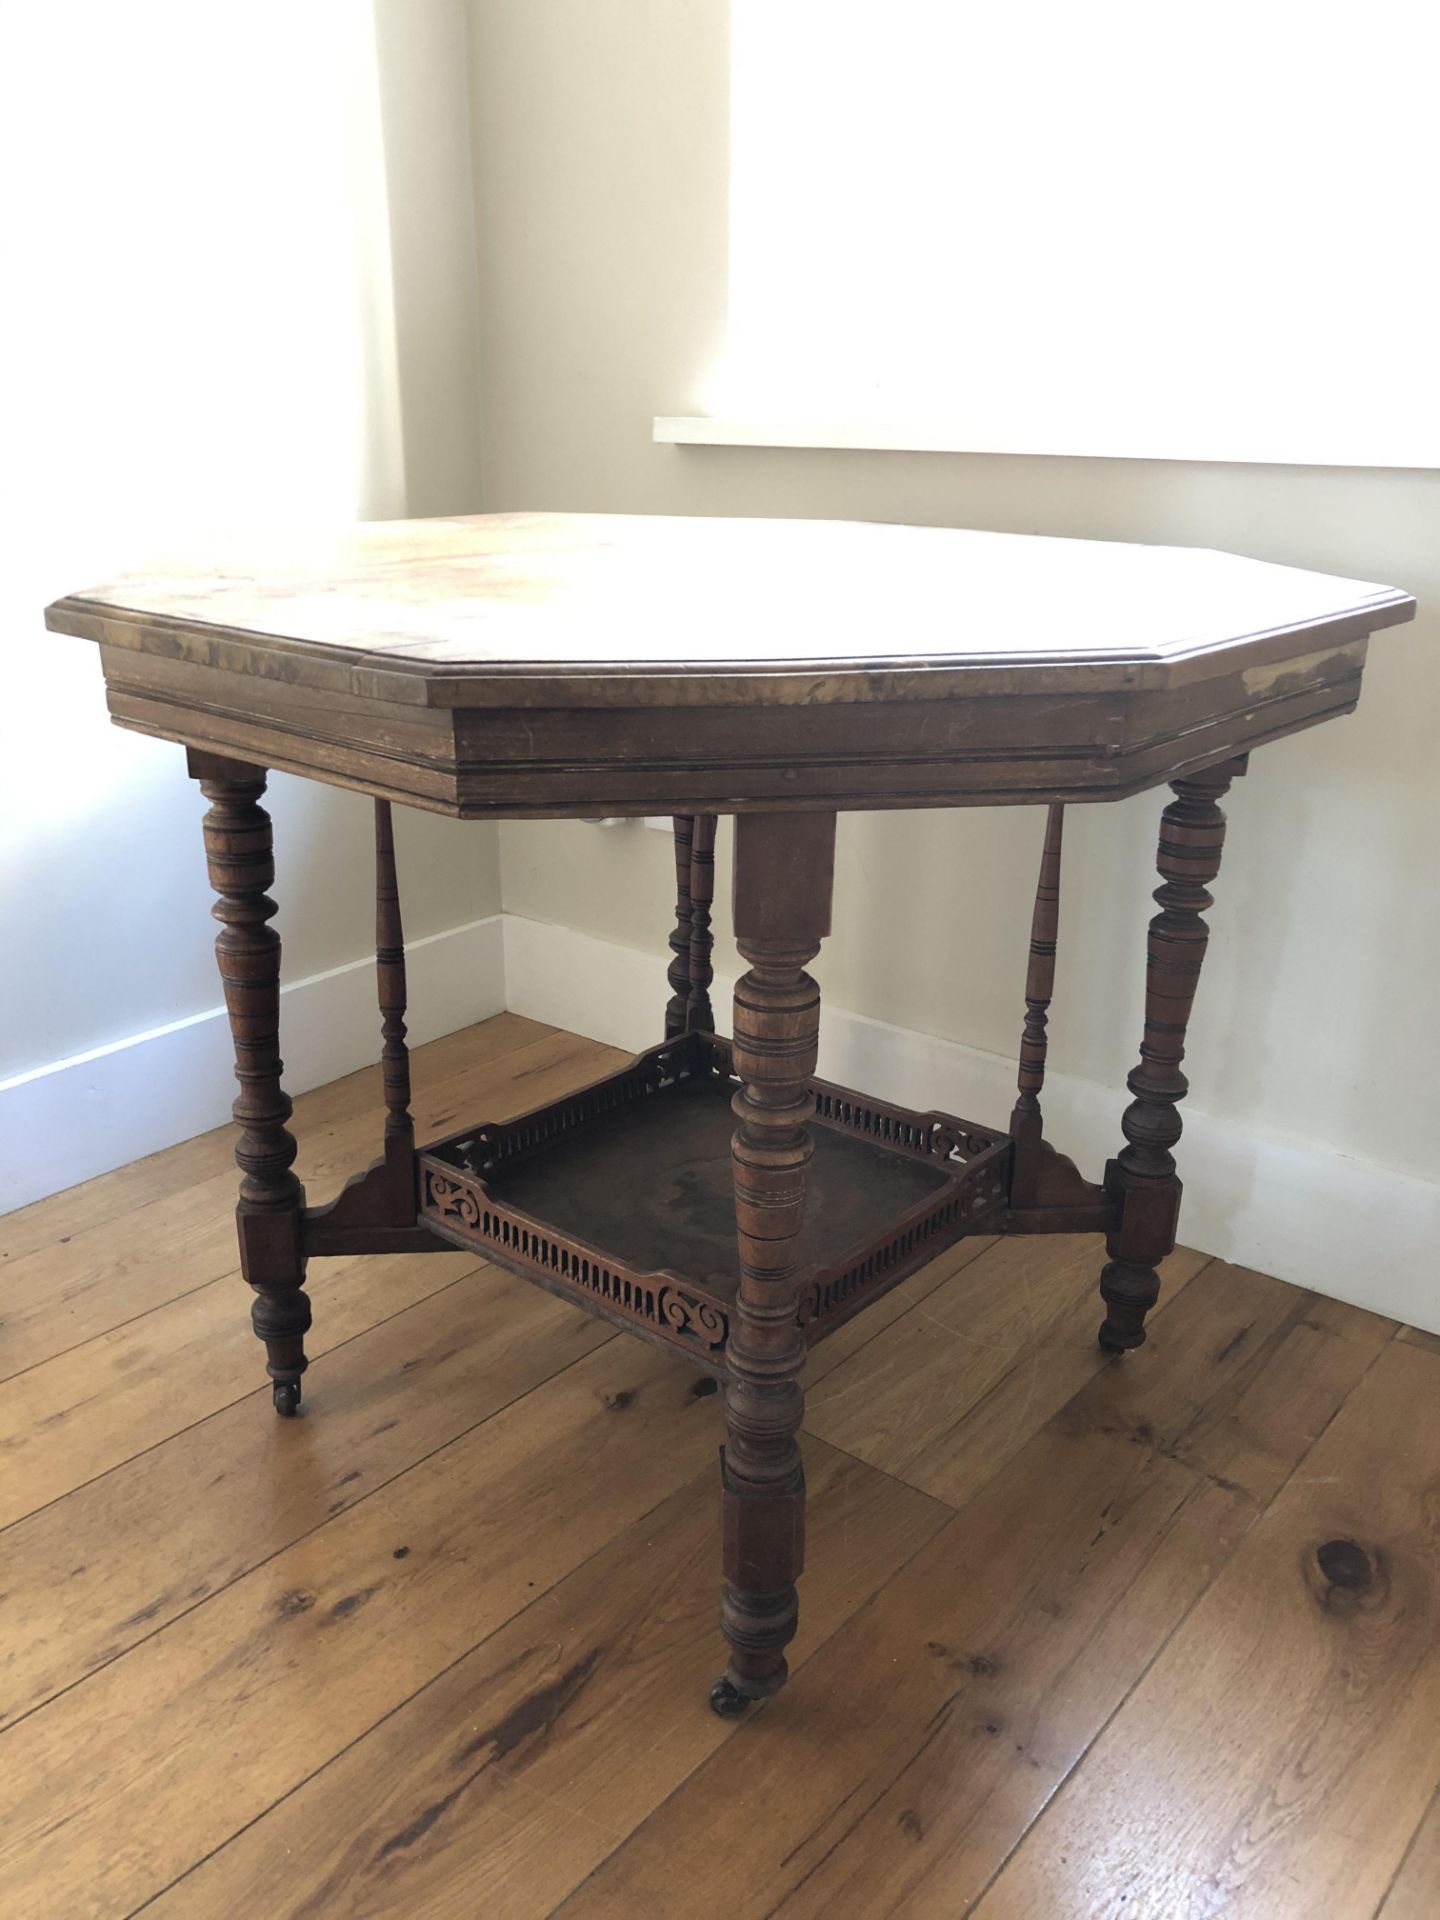 Octaginal Wooden Occasional Table - Image 3 of 3